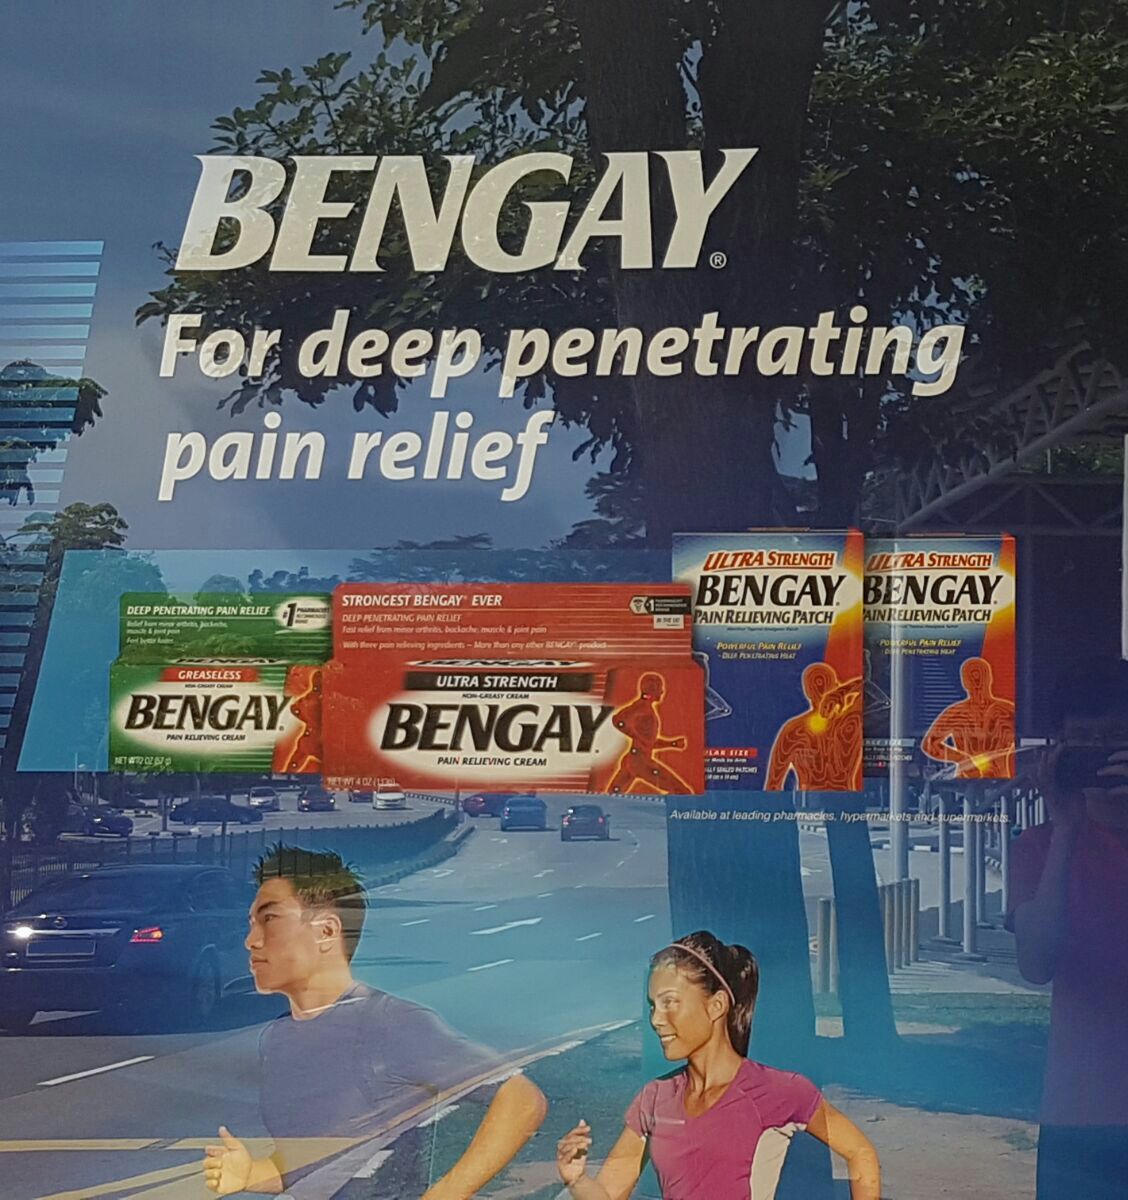 A real ad in Singapore - meme